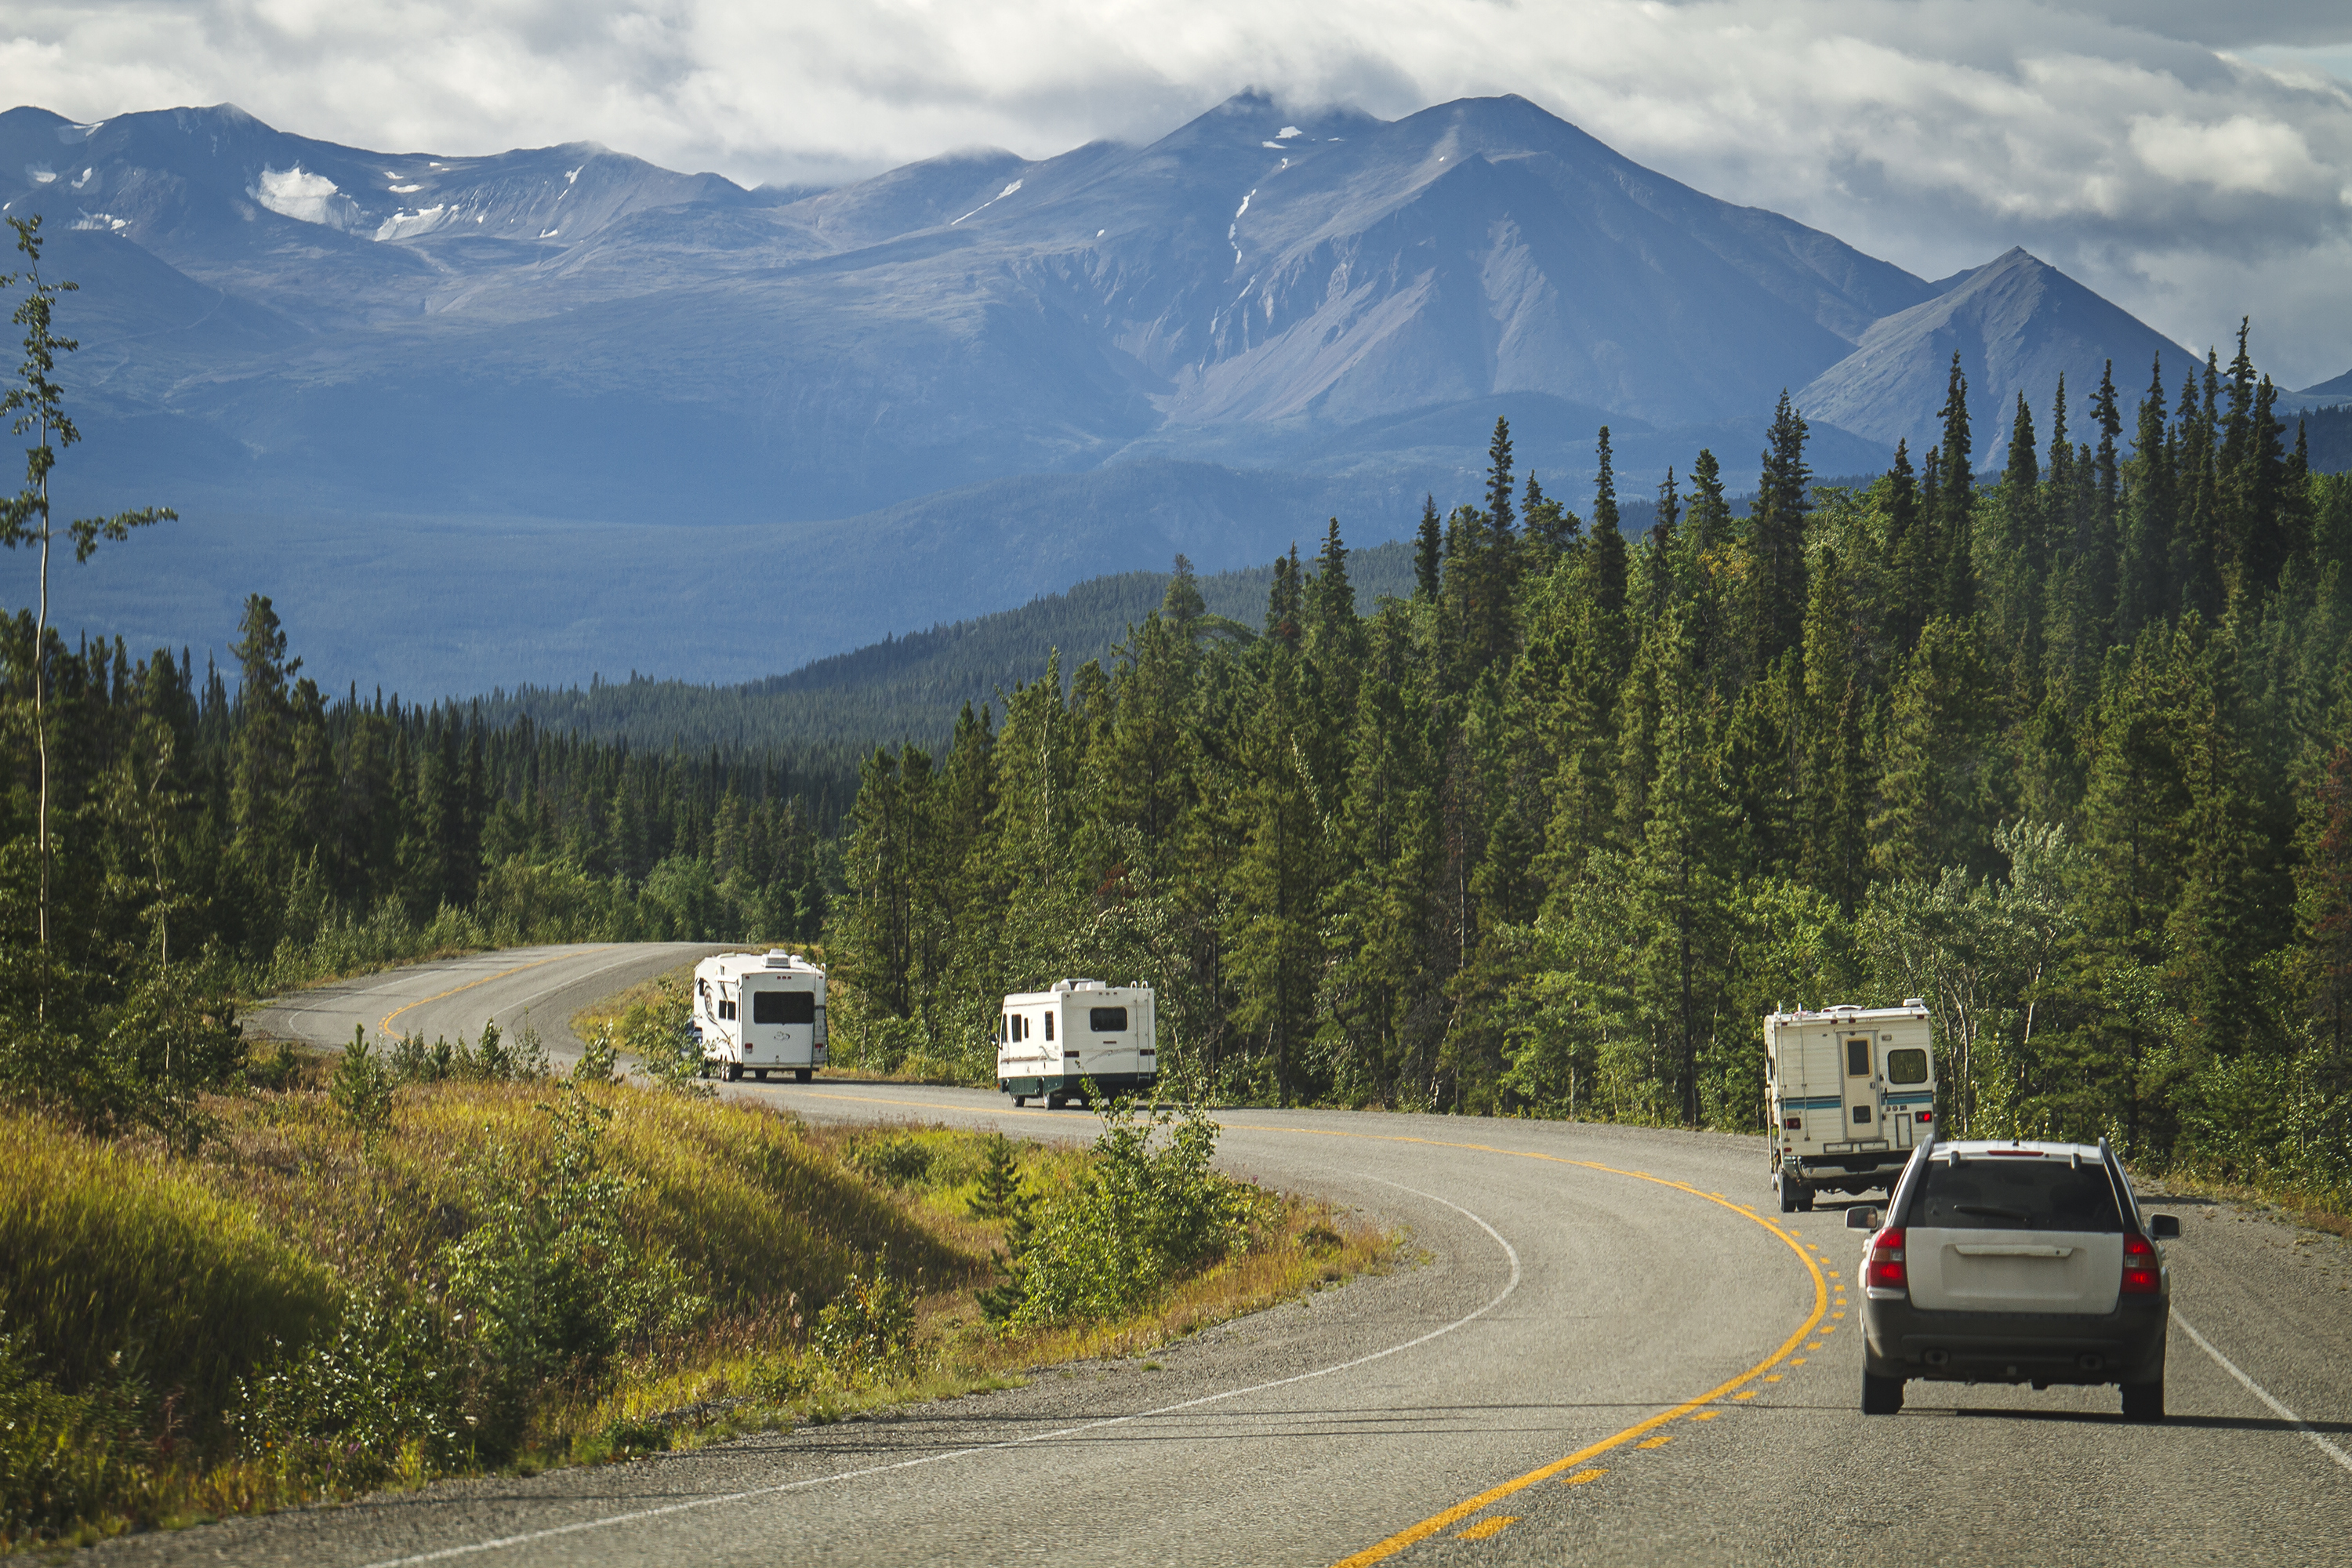 Bumped and Bruised RVing to Alaska, with Coach-Net Along for the Ride